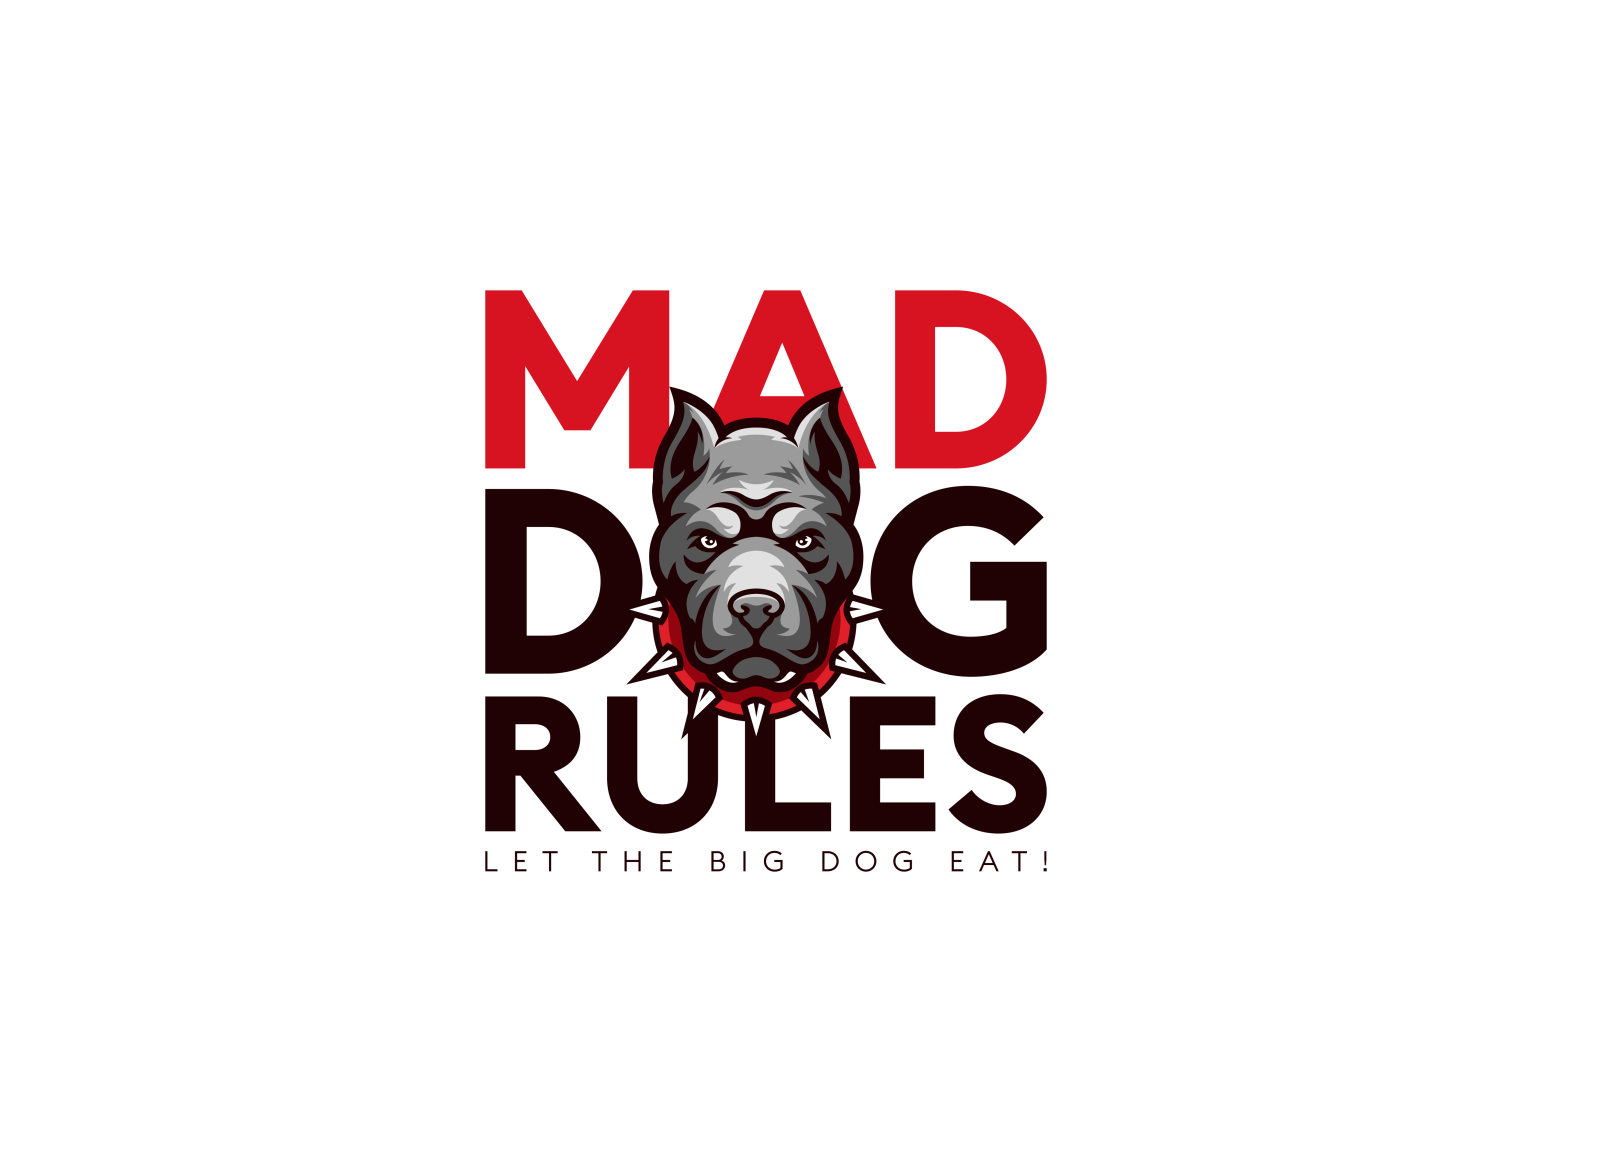 Mad Dog Rules by Md Muminul Hasan Khan on Dribbble